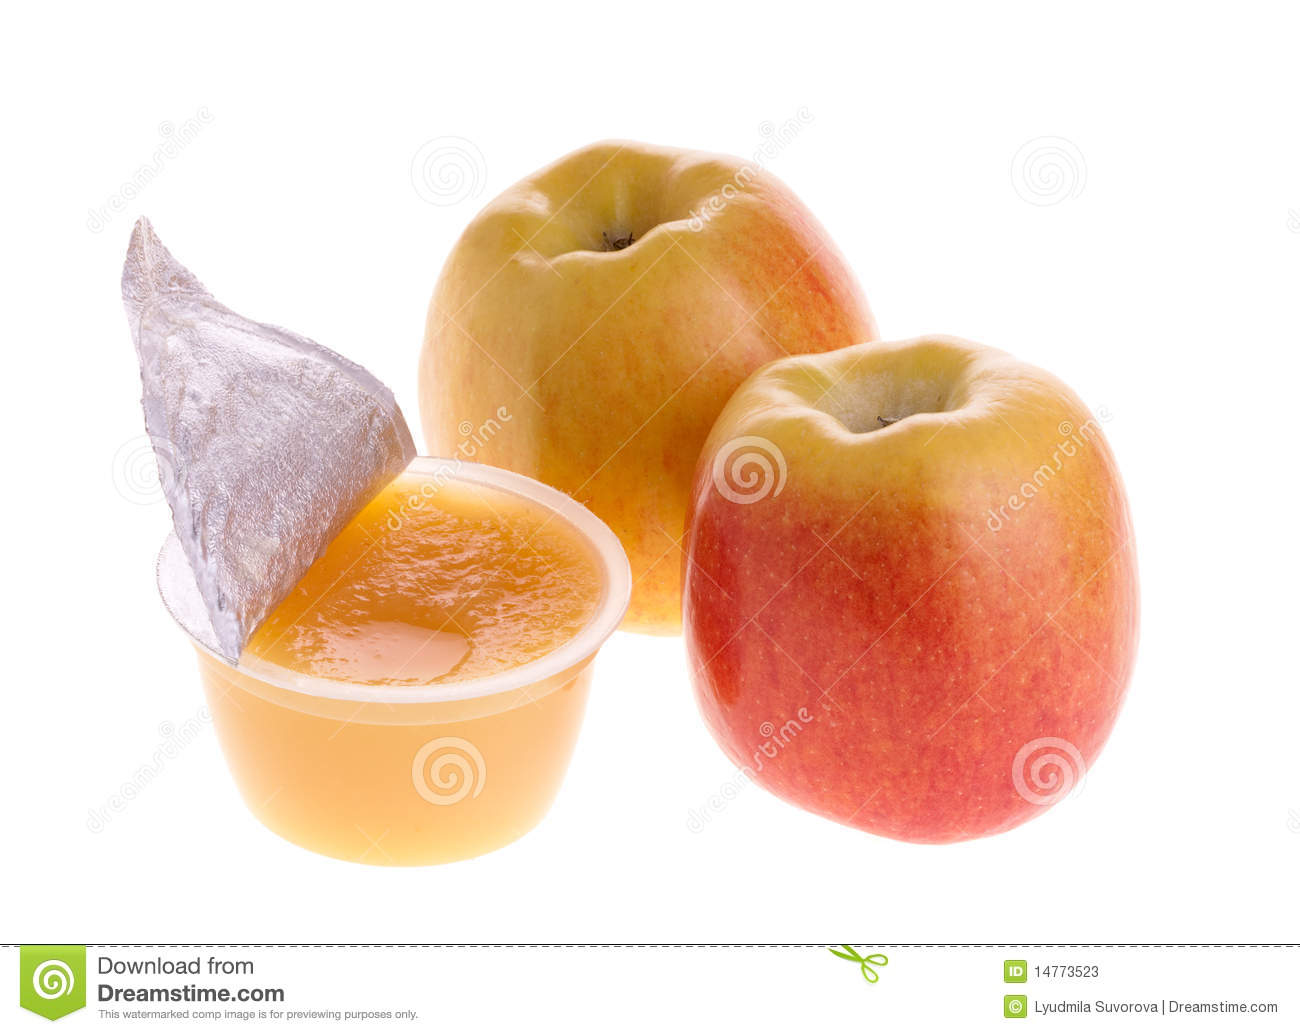 Apple Sauce And Apples Stock Photos   Image  14773523